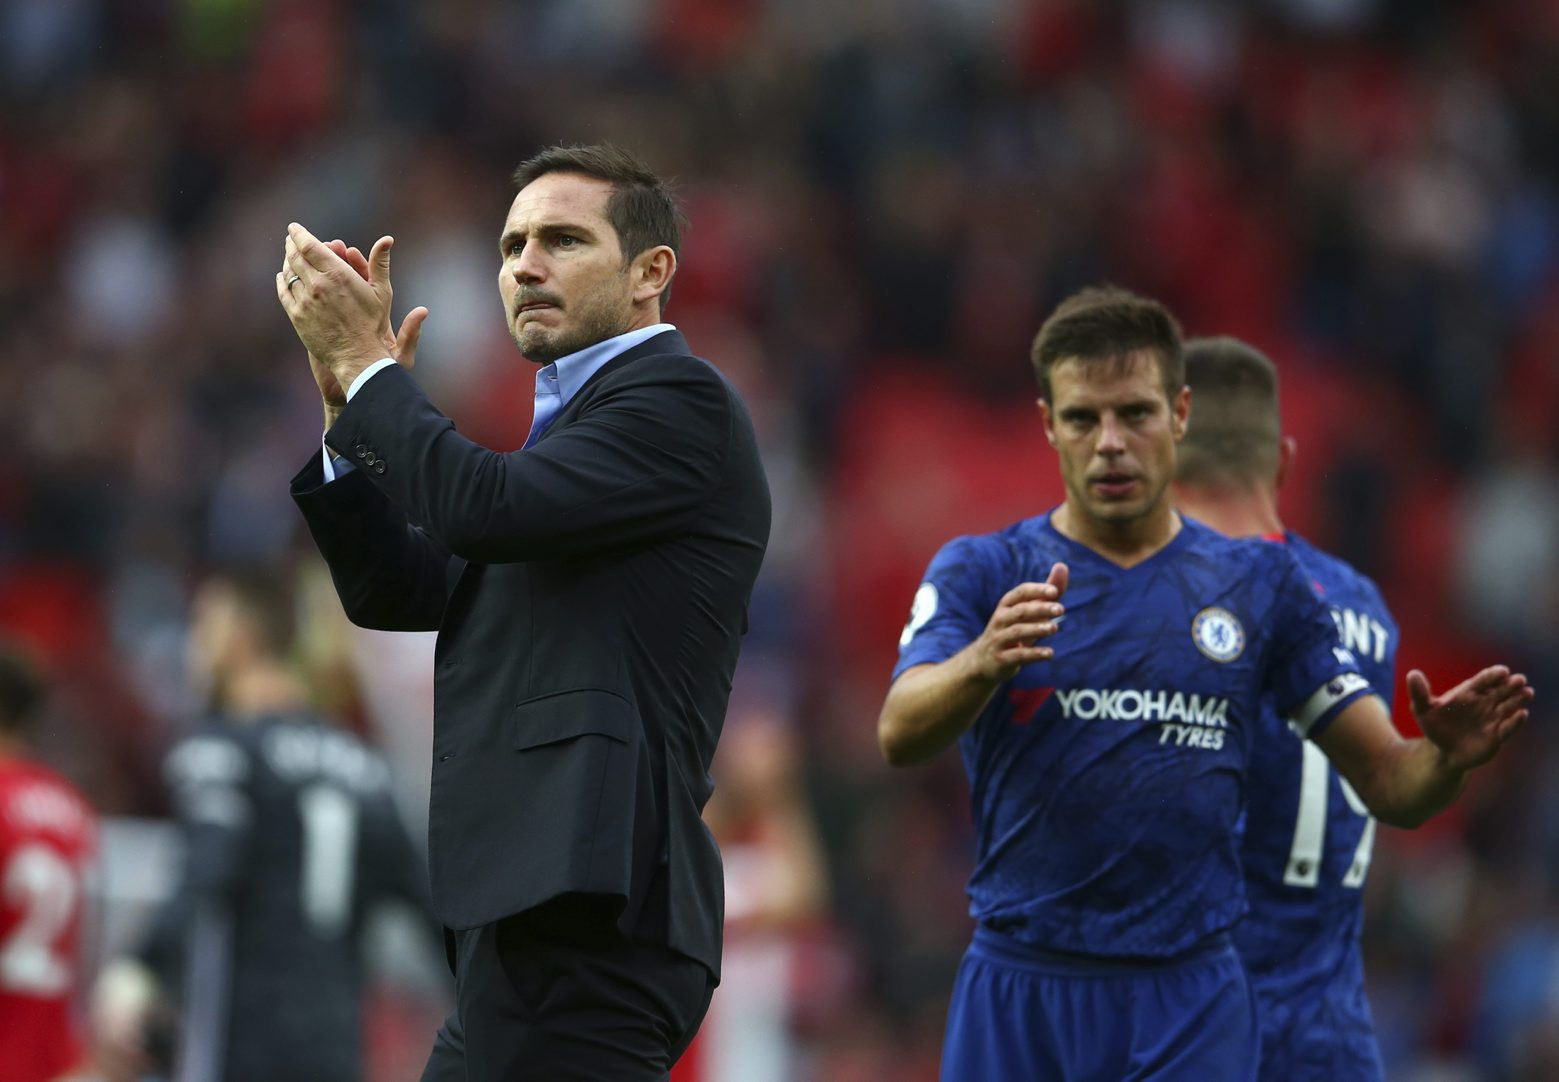 Chelsea's head coach Frank Lampard, left, and Chelsea's Cesar Azpilicueta acknowledge spectators after the English Premier League soccer match between Manchester United and Chelsea at Old Trafford in Manchester, England, Sunday, Aug. 11, 2019. (AP Photo/Dave Thompson) Britain Soccer Premier League